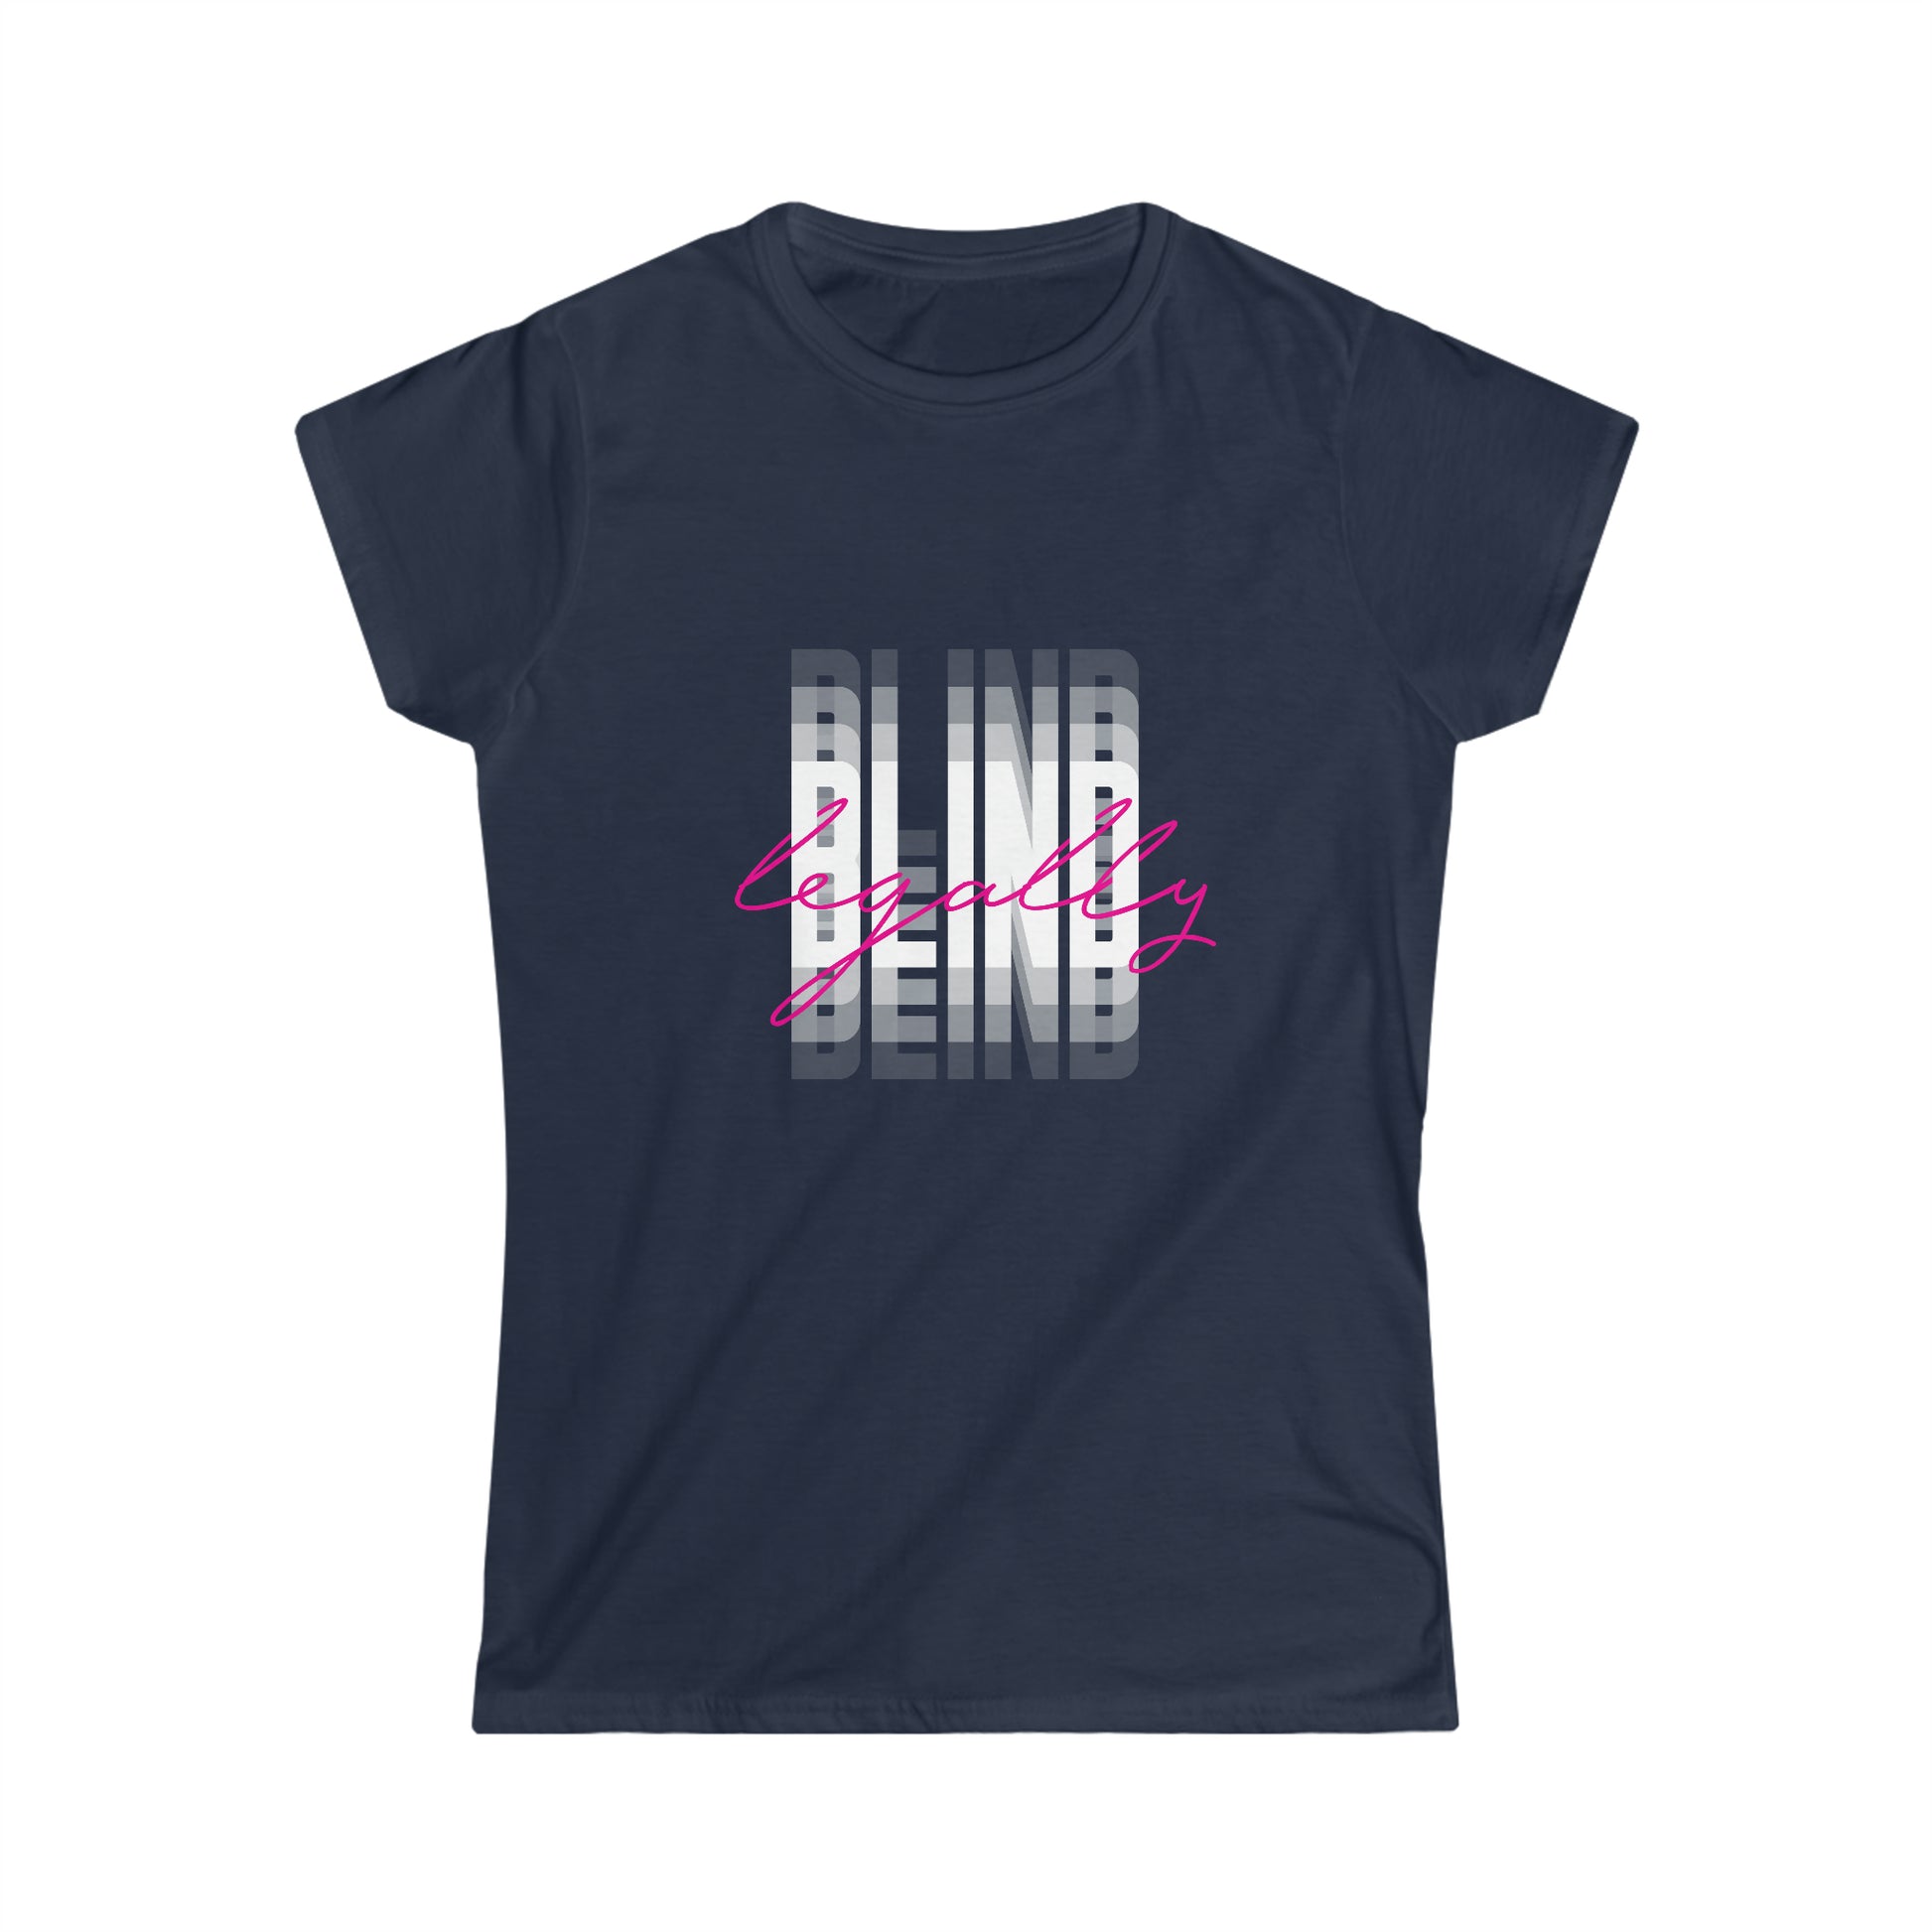 Legally Blind (Blurry) w/pink -Women's Softstyle Tee